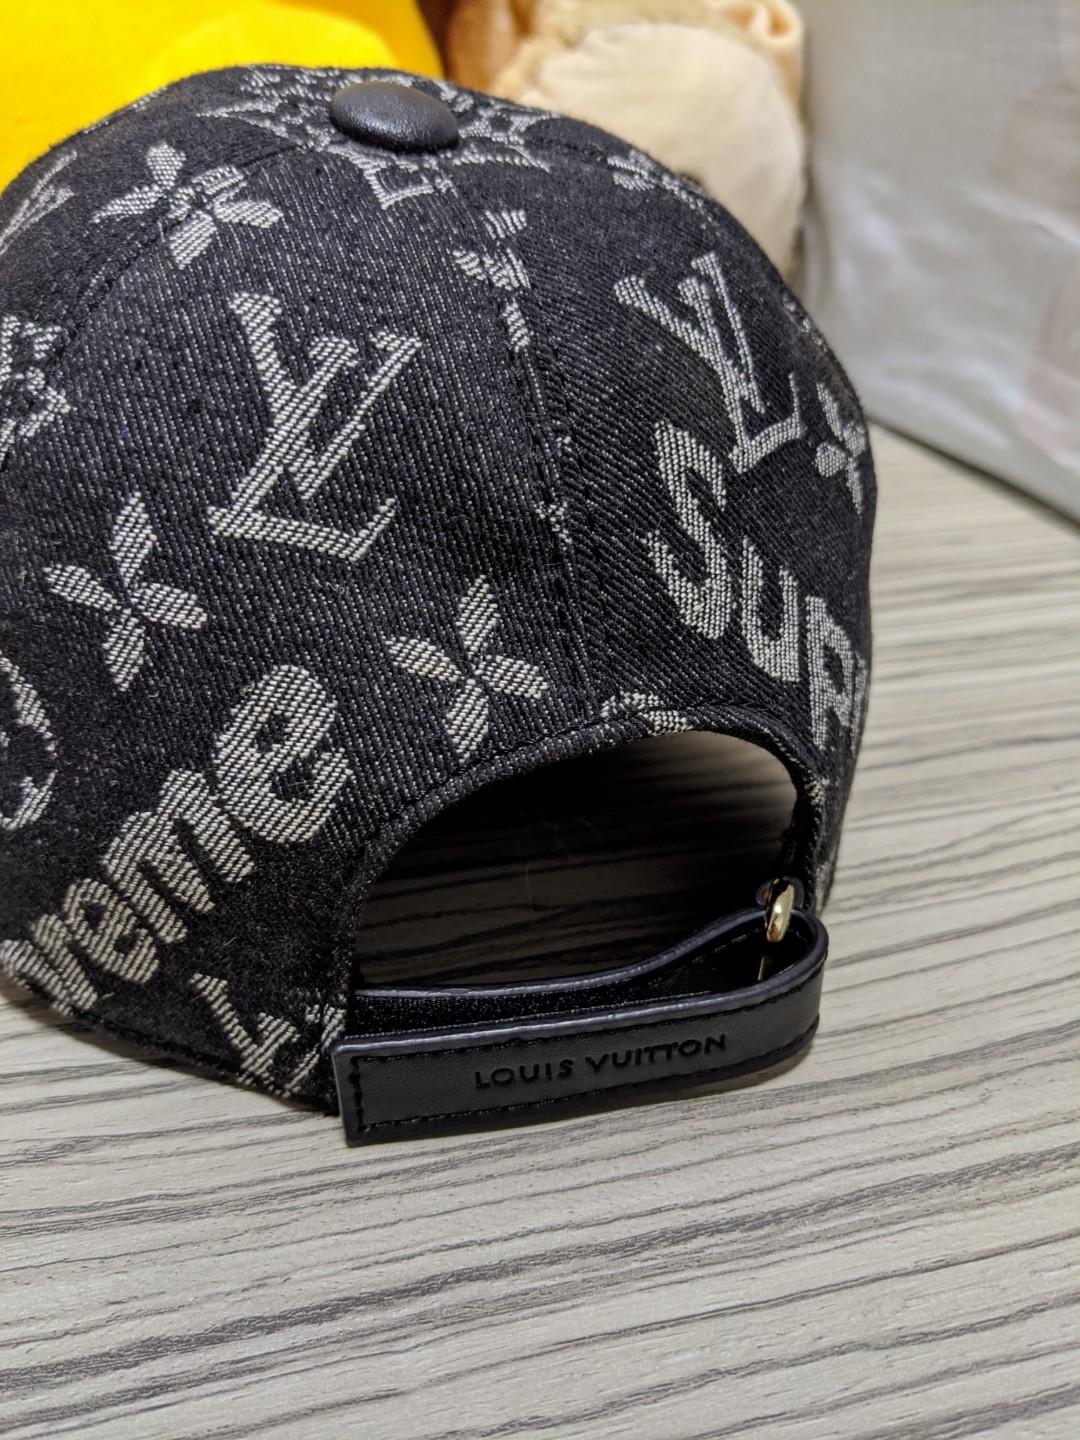 Louis Vuitton Supreme Cap Red Pattern price from ajebomarket in